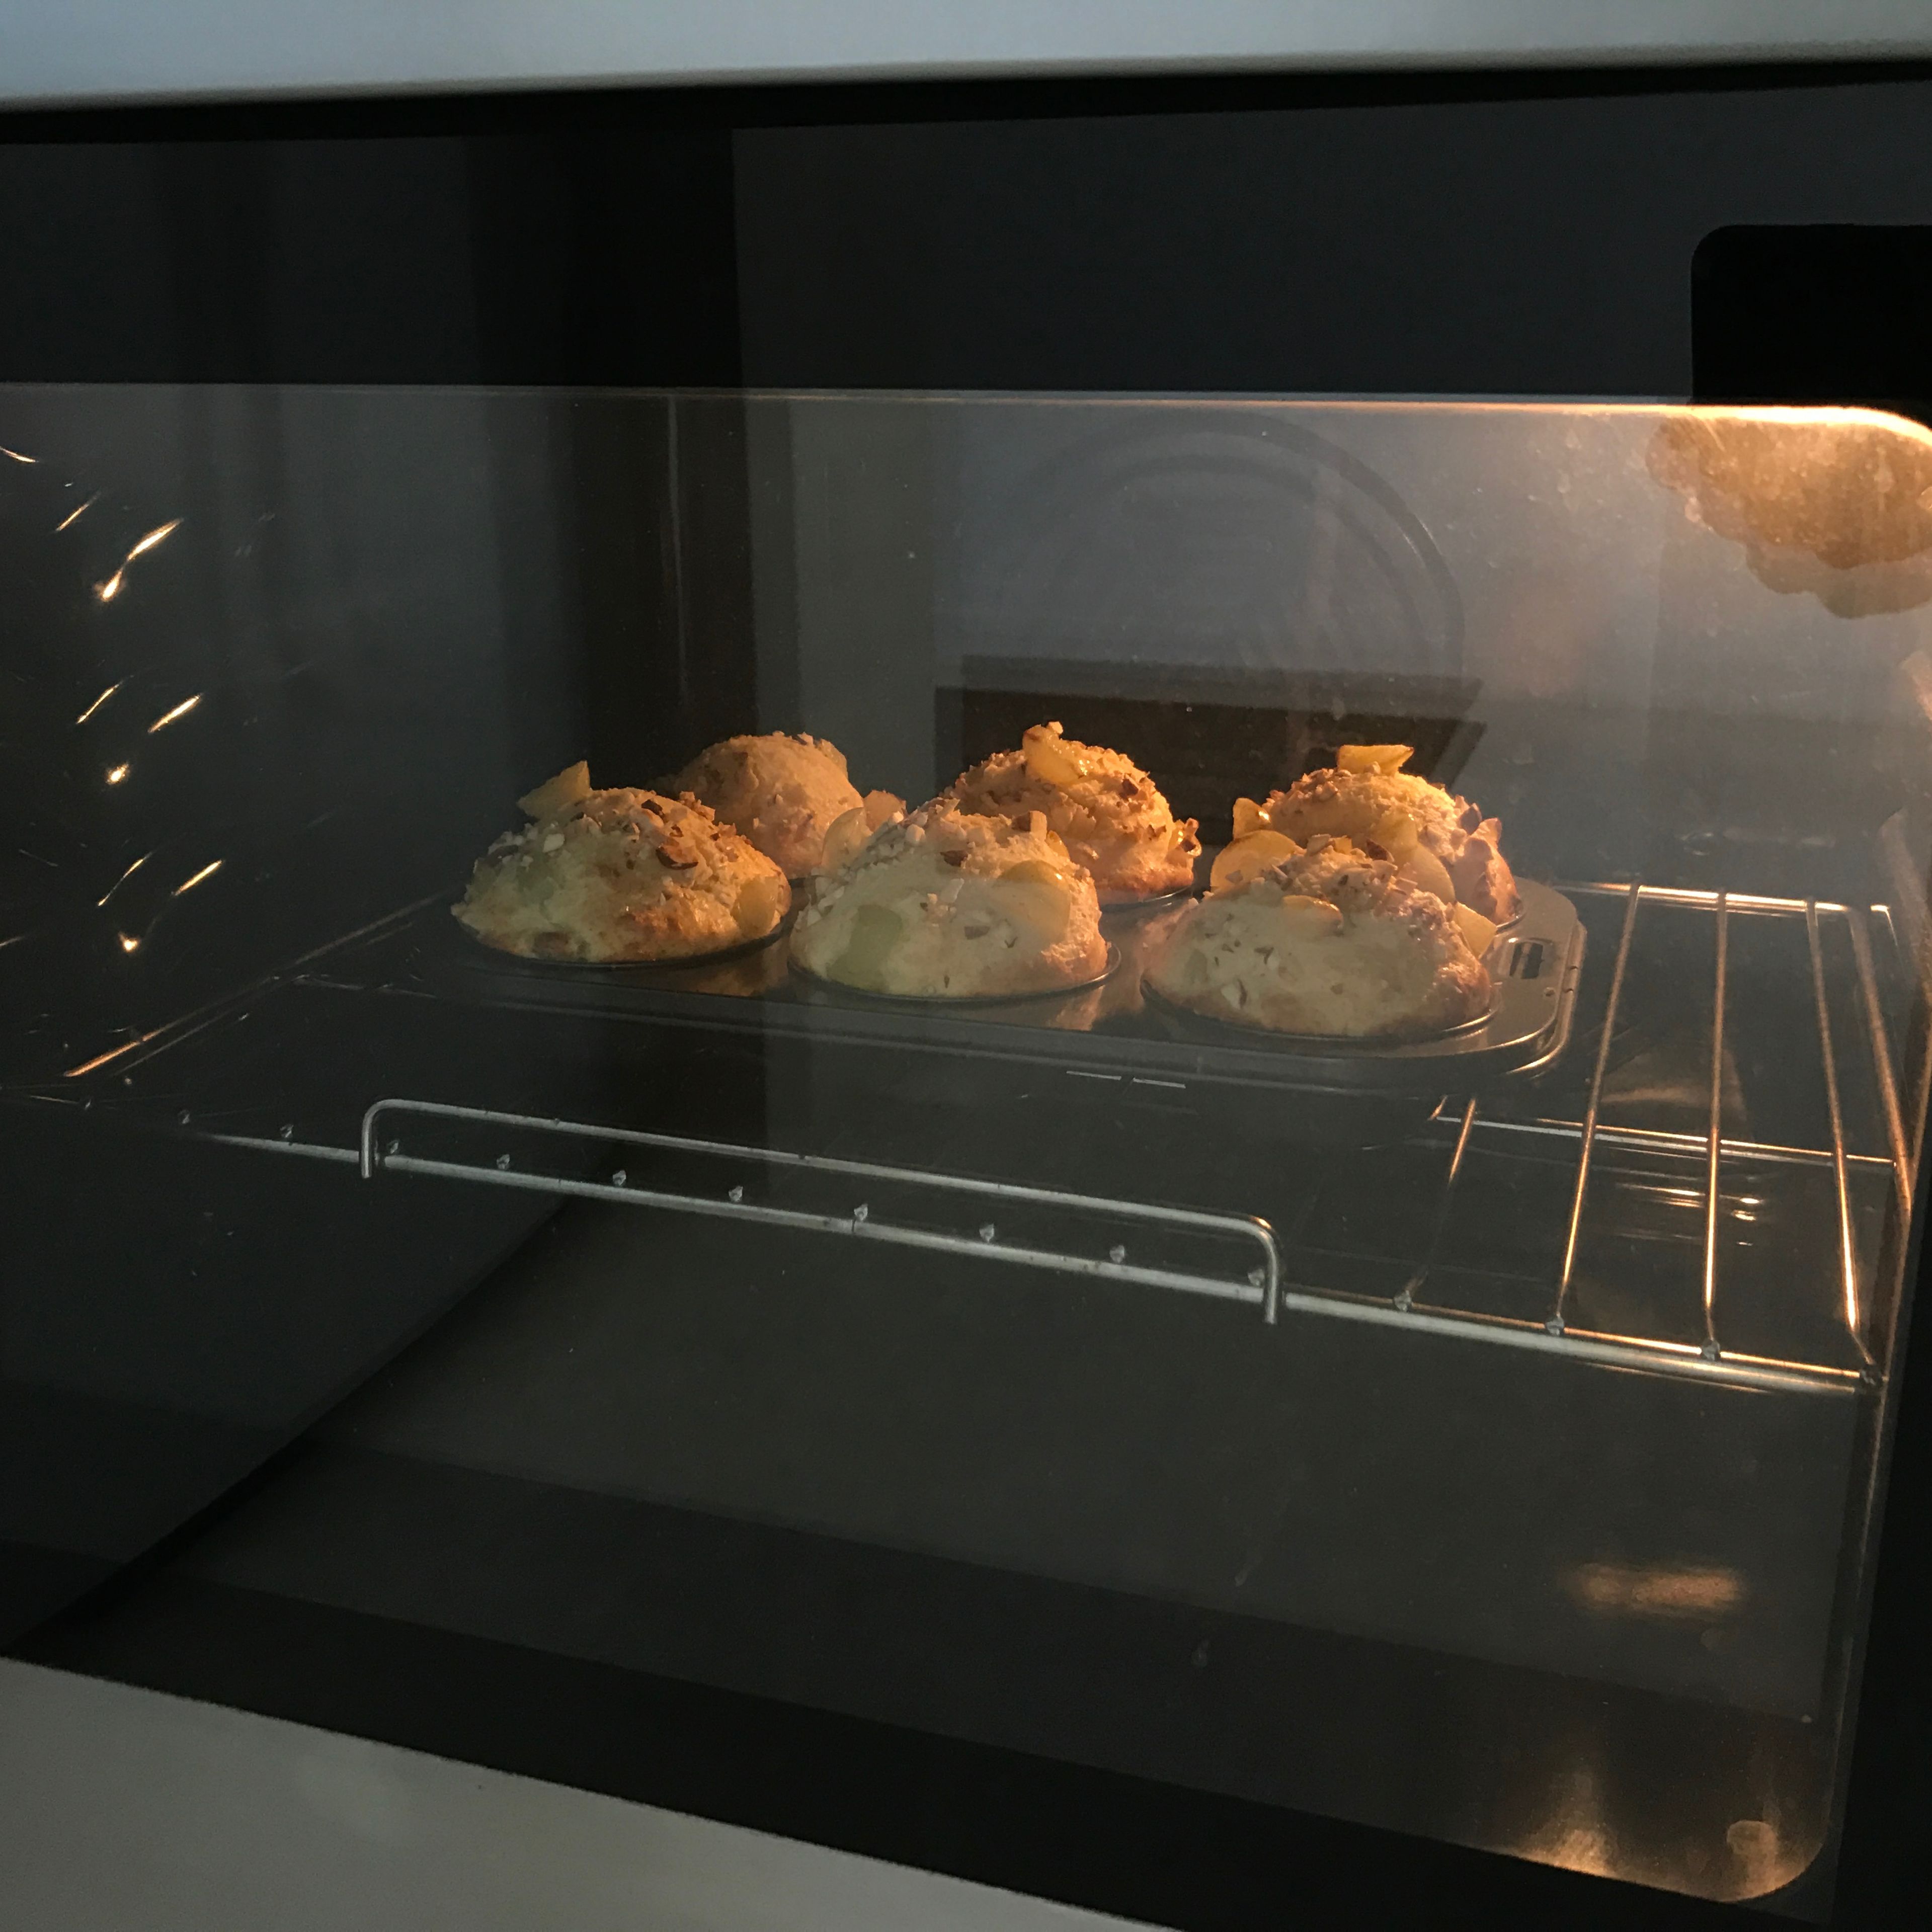 Cook the muffins in a preheated ventilated oven at 180° for about 25 minutes until the muffins are cooked evenly, always do the toothpick test.